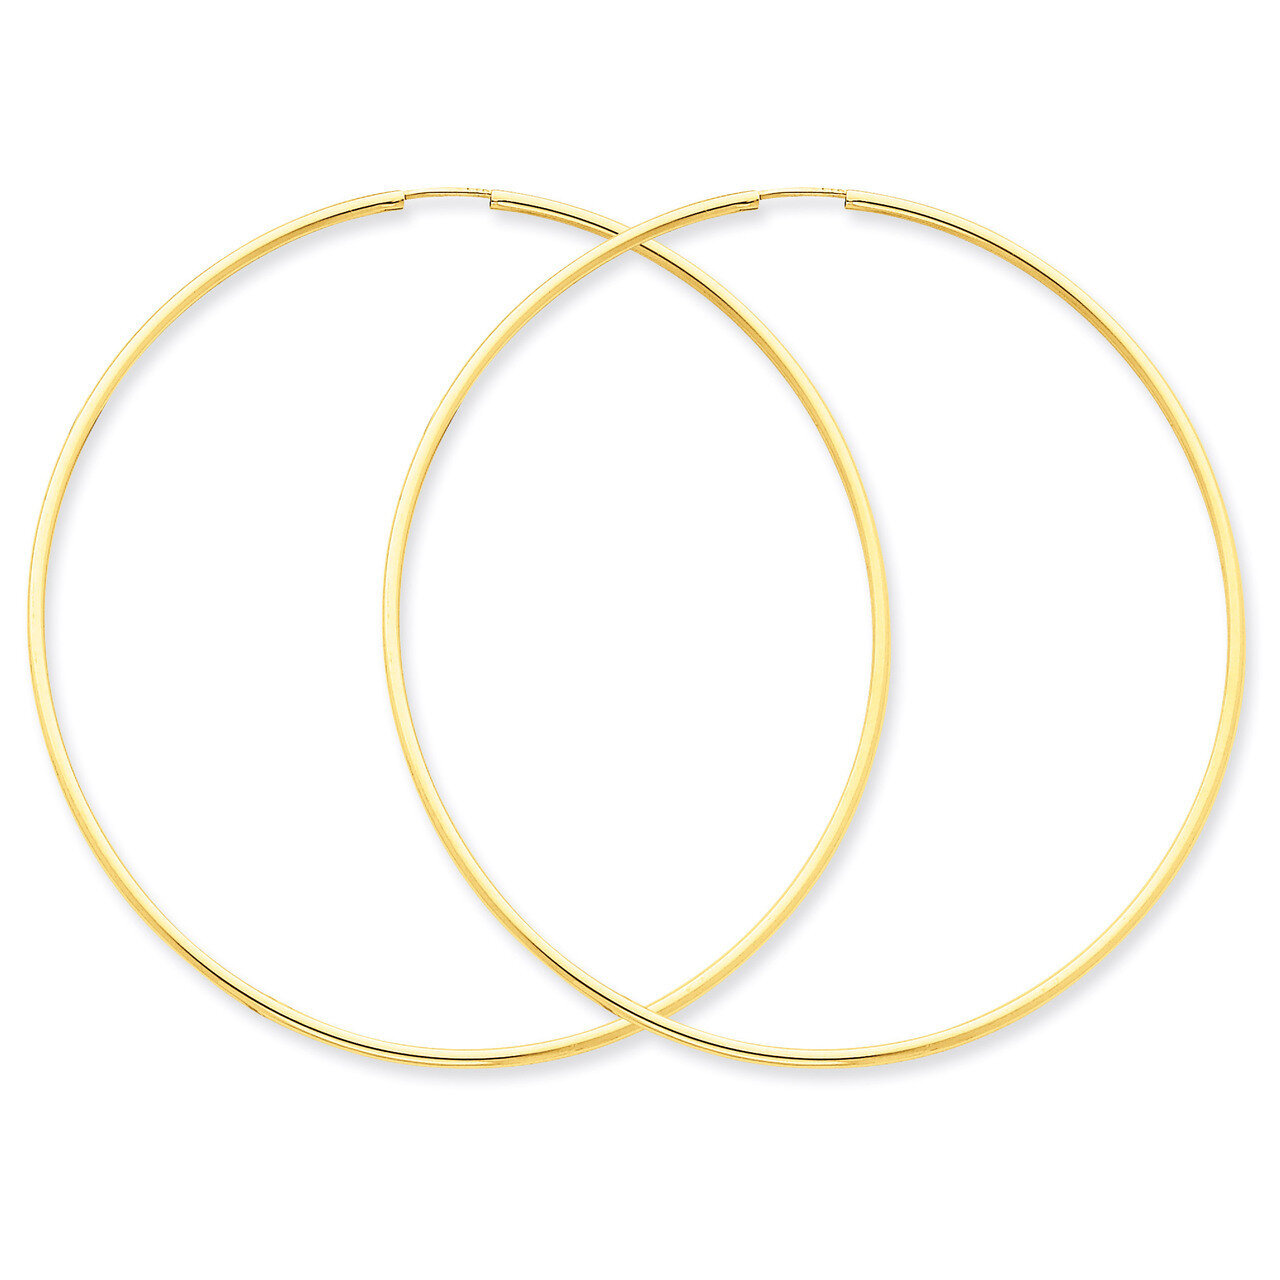 1.5mm Polished Round Endless Hoop Earrings 14k Gold XY1168